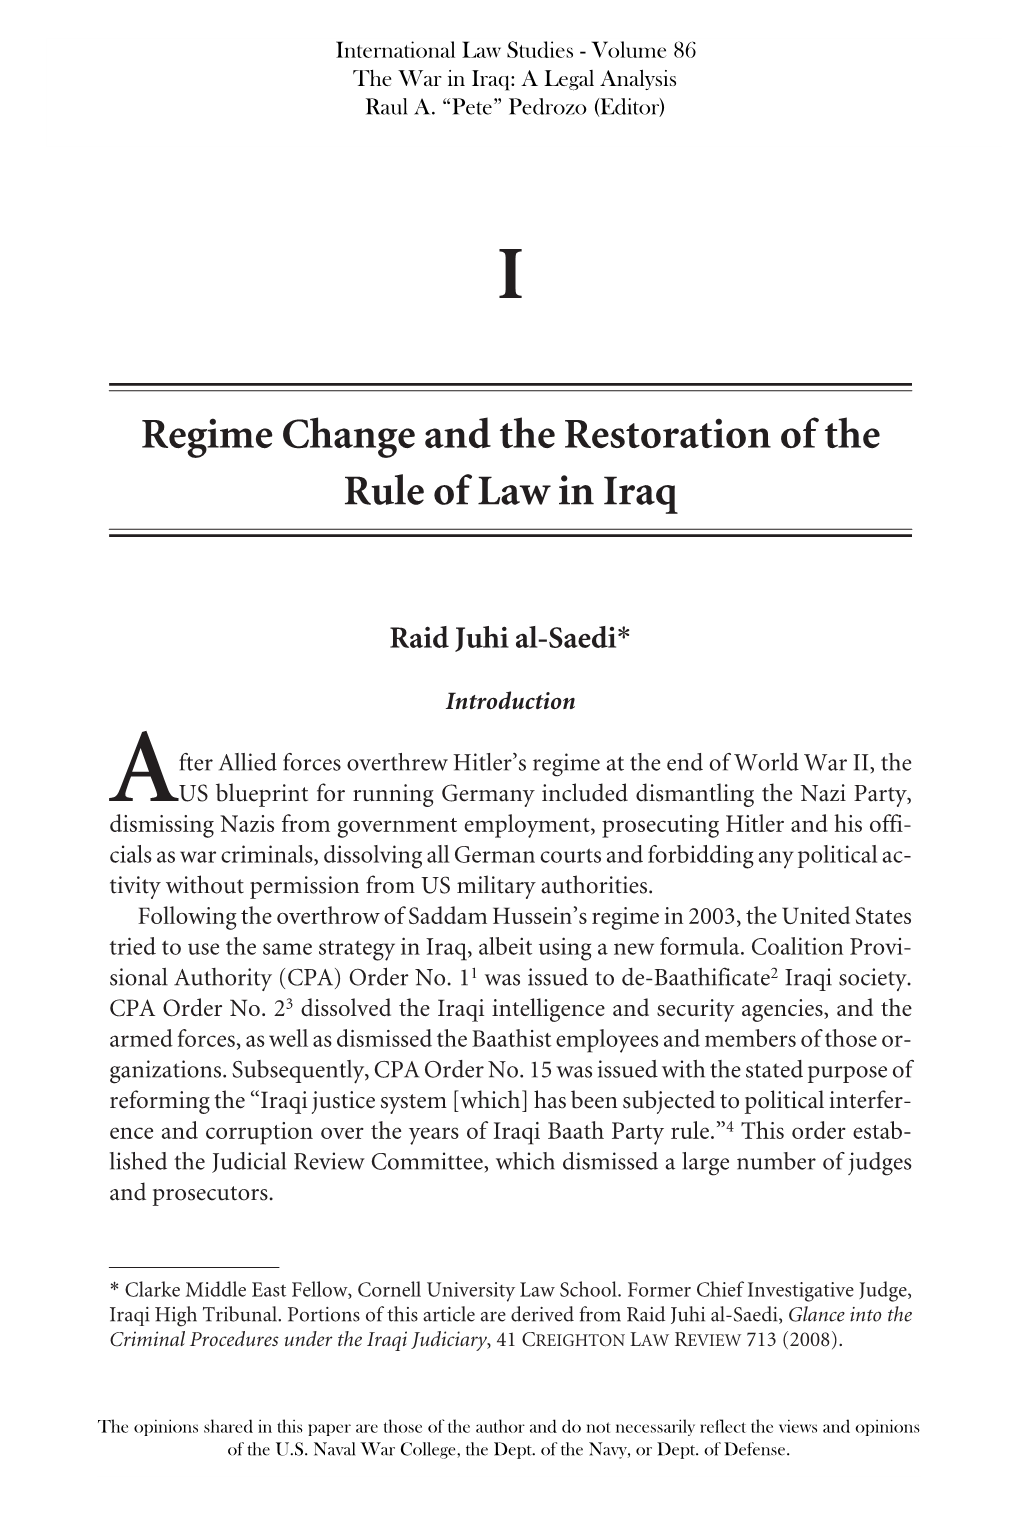 Regime Change and the Restoration of the Rule of Law in Iraq